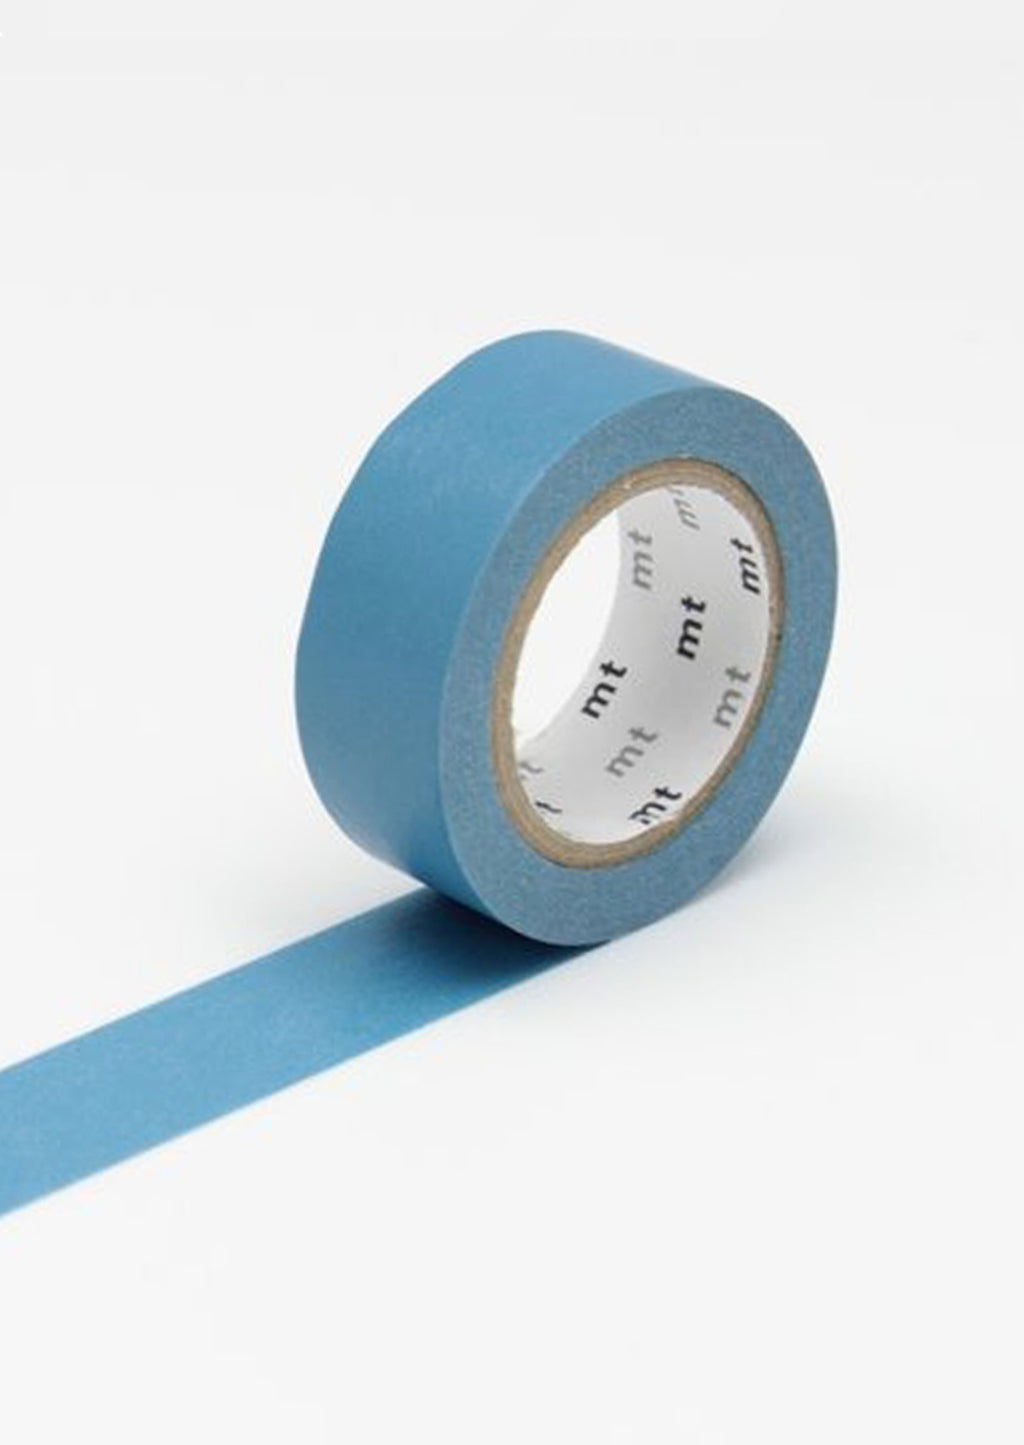 Ocean: A roll of washi tape in solid medium blue color.